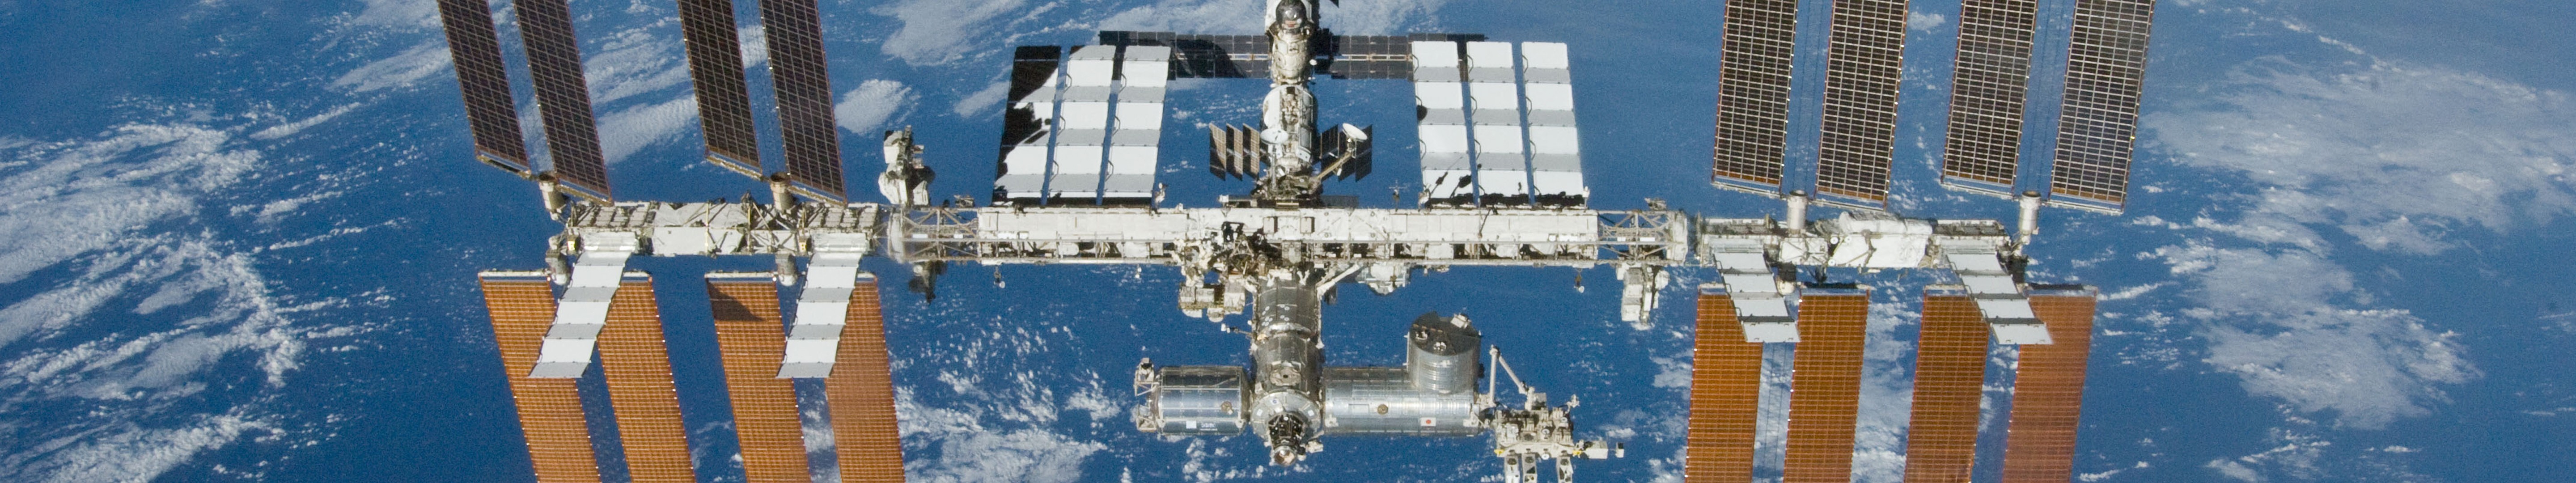 General 5760x1080 space International Space Station planet NASA Earth